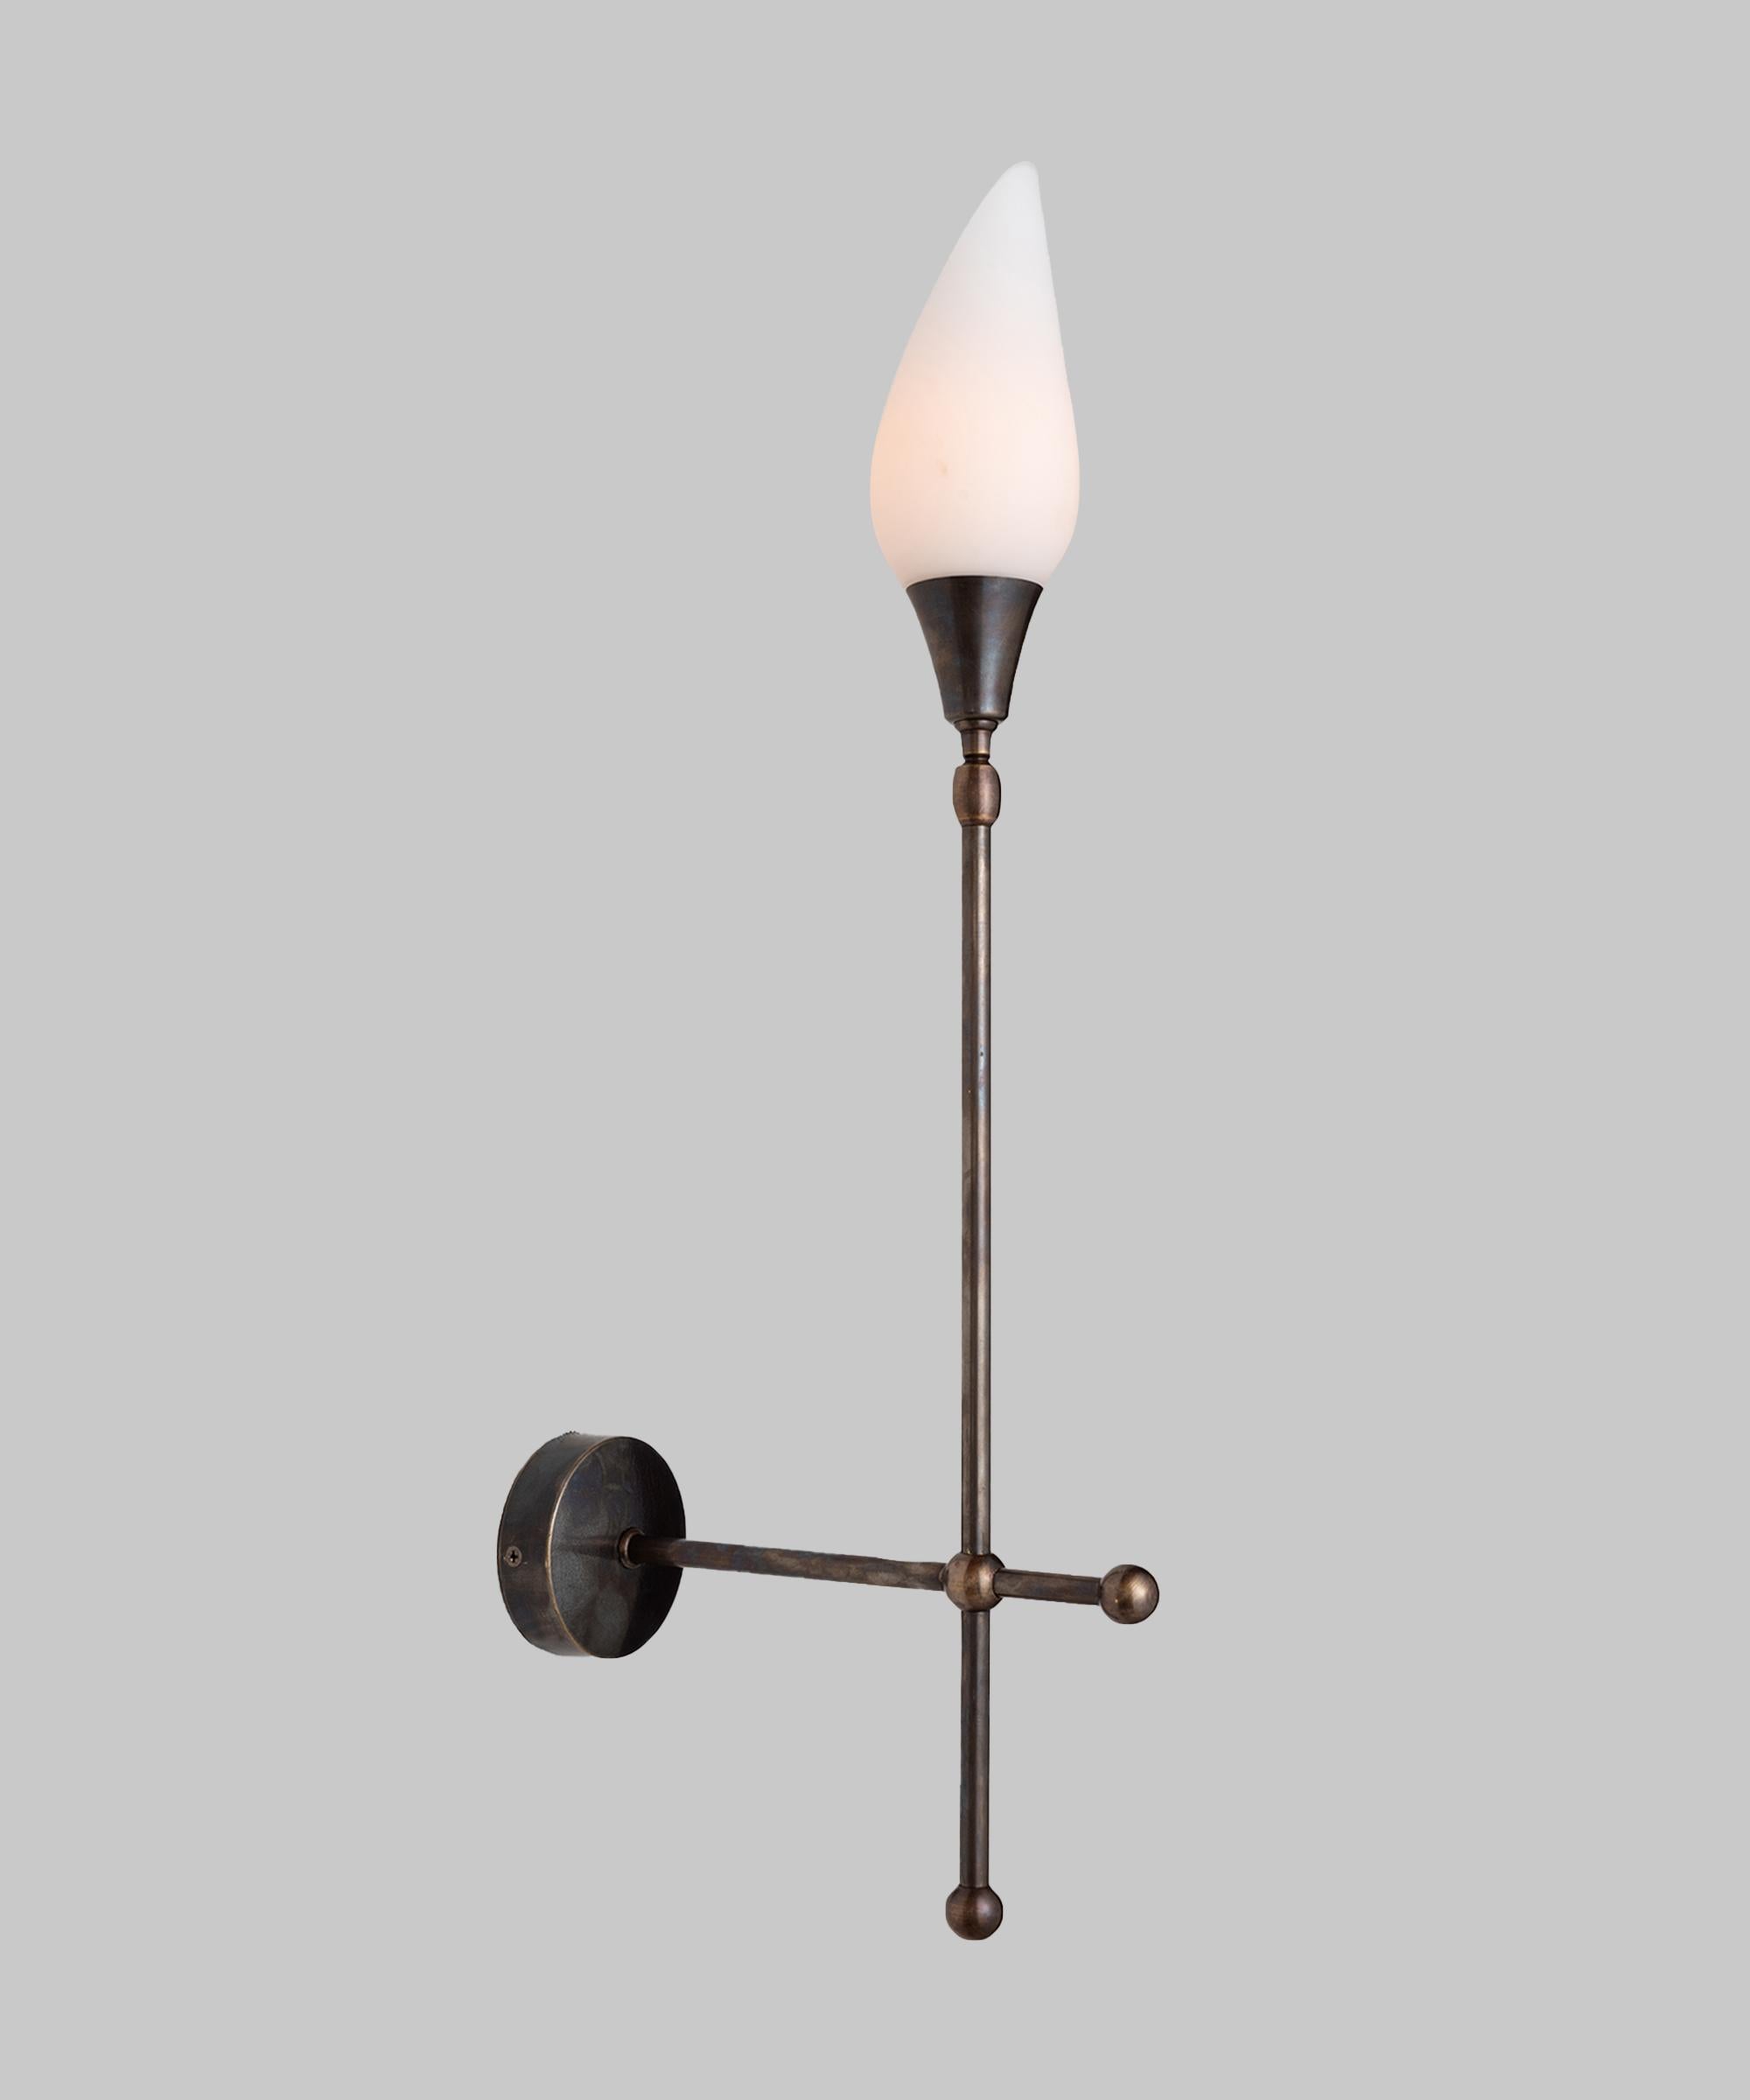 Vintage opaline glass on new brass arm.
 
*Please Note: This fixture is made in Italy, and comes newly wired (eu wiring). It is not UL Listed. Standard Lead Time is 4-6 Weeks*
